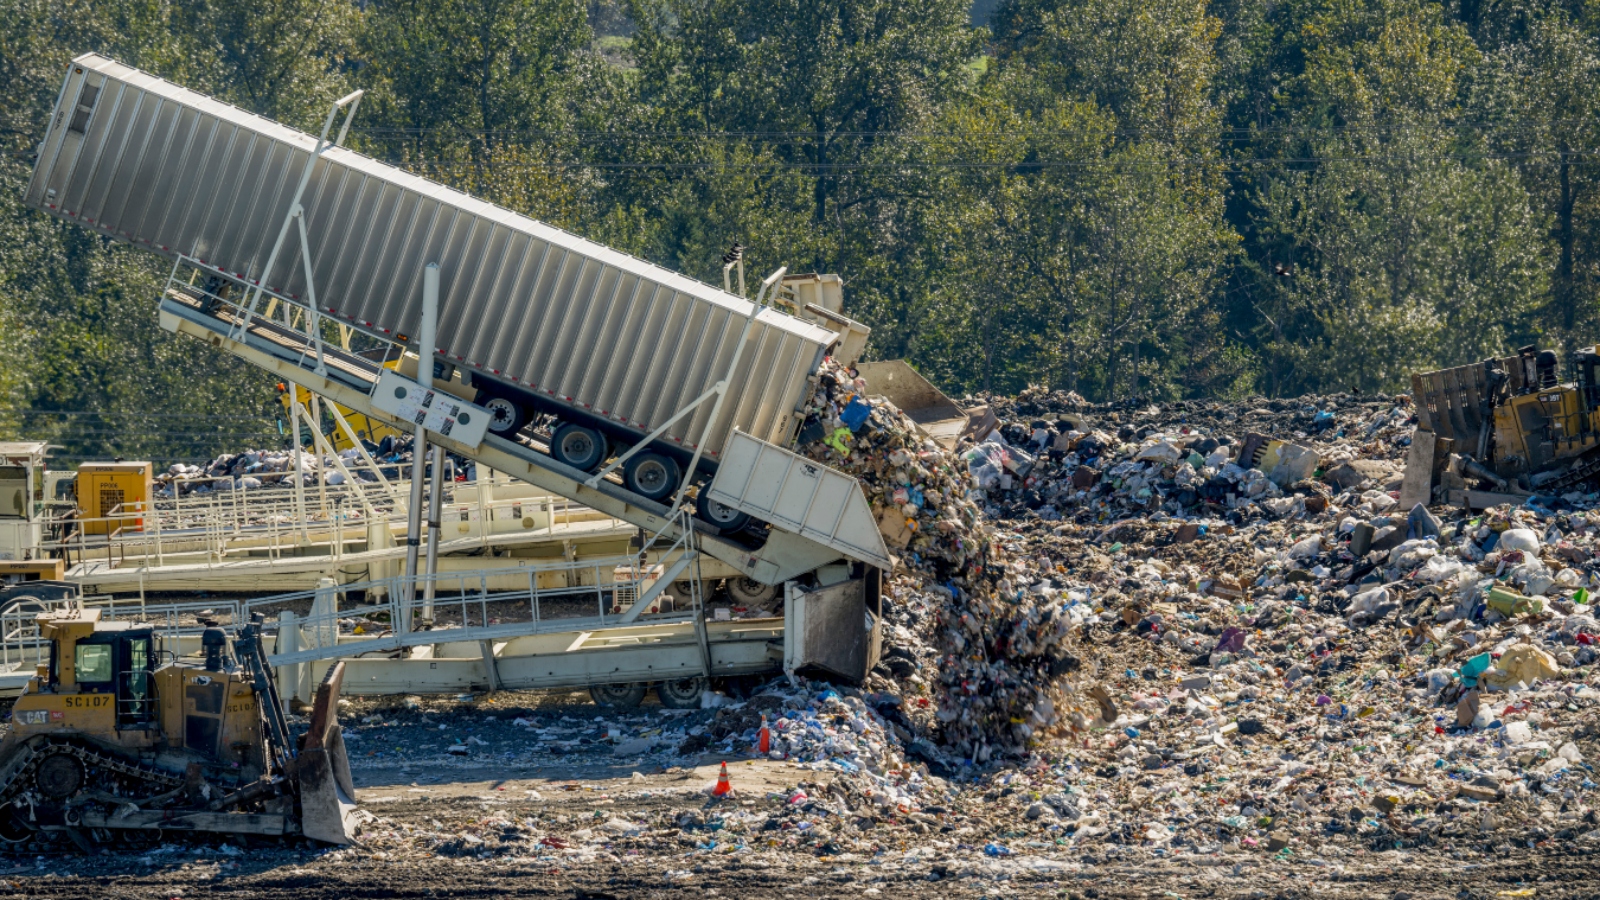 Landfills leak methane with impunity, new research shows